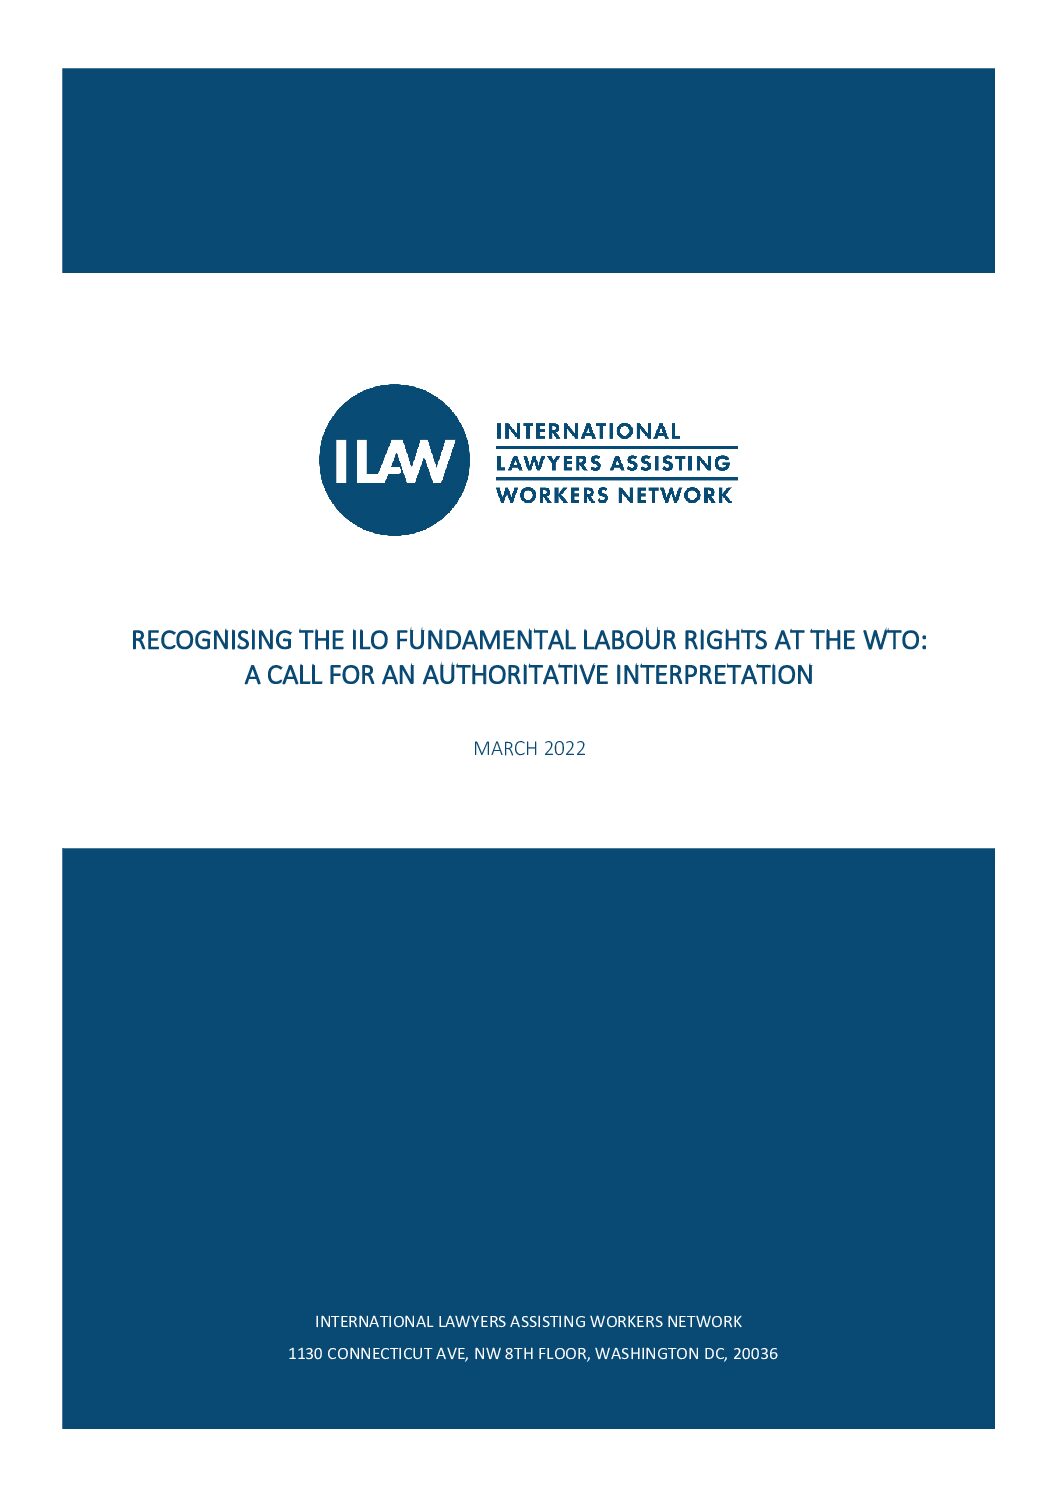 Cover of Recognising the ILO Fundamental Labour Rights at the WTO: A Call for an Authoritative Interpretation, a report by the ILAW Network, a project of Solidarity Center